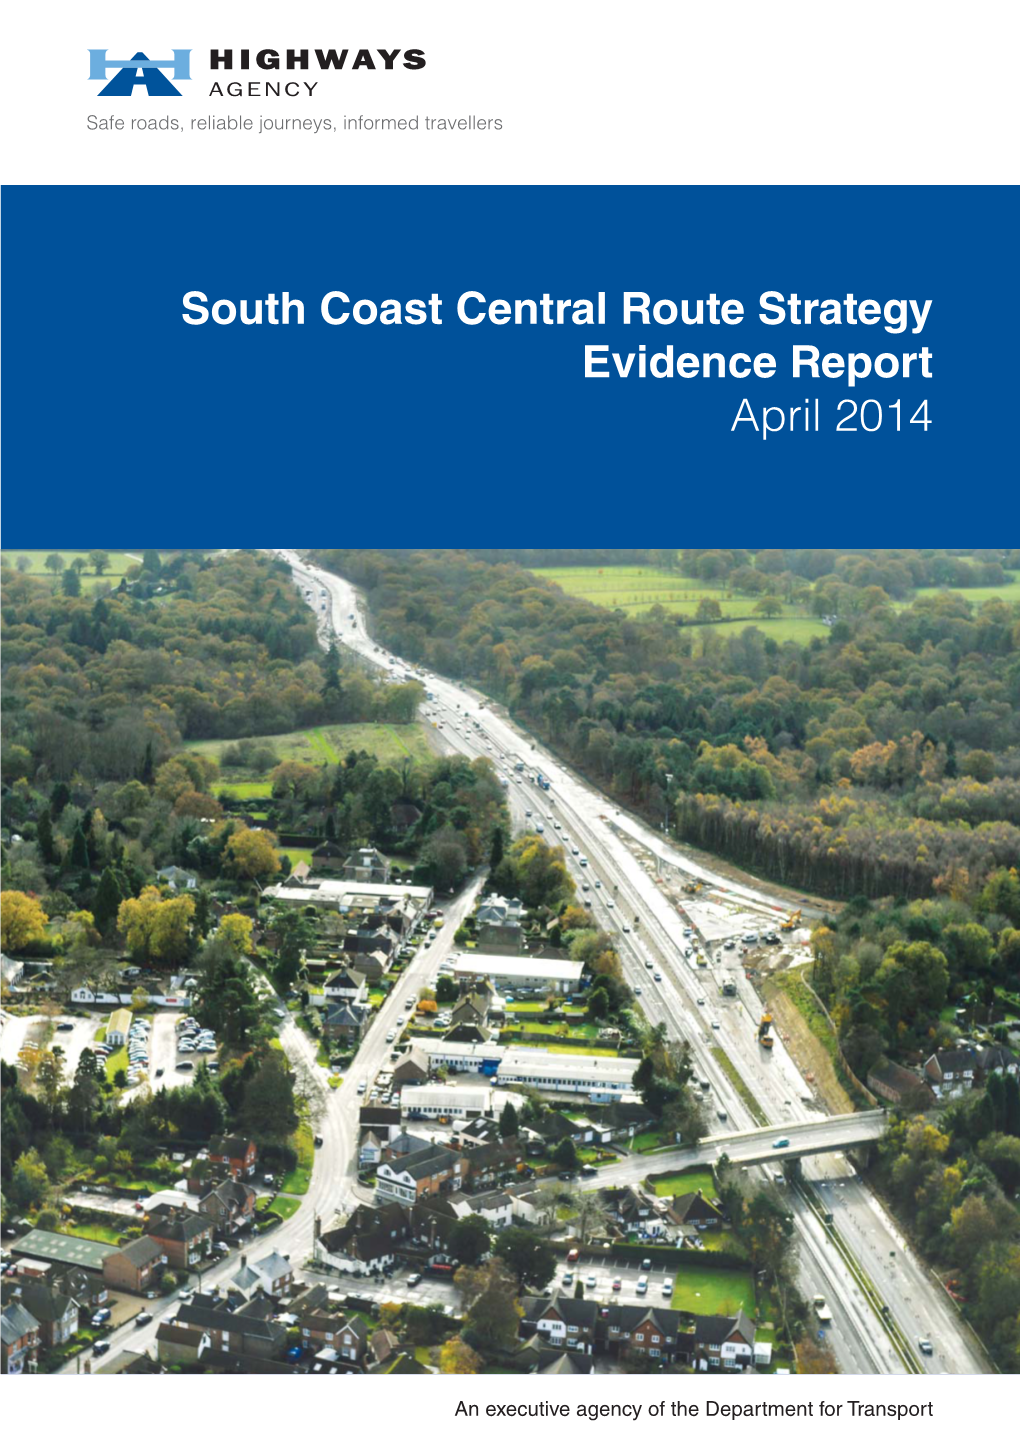 South Coast Central Route Strategy Evidence Report April 2014